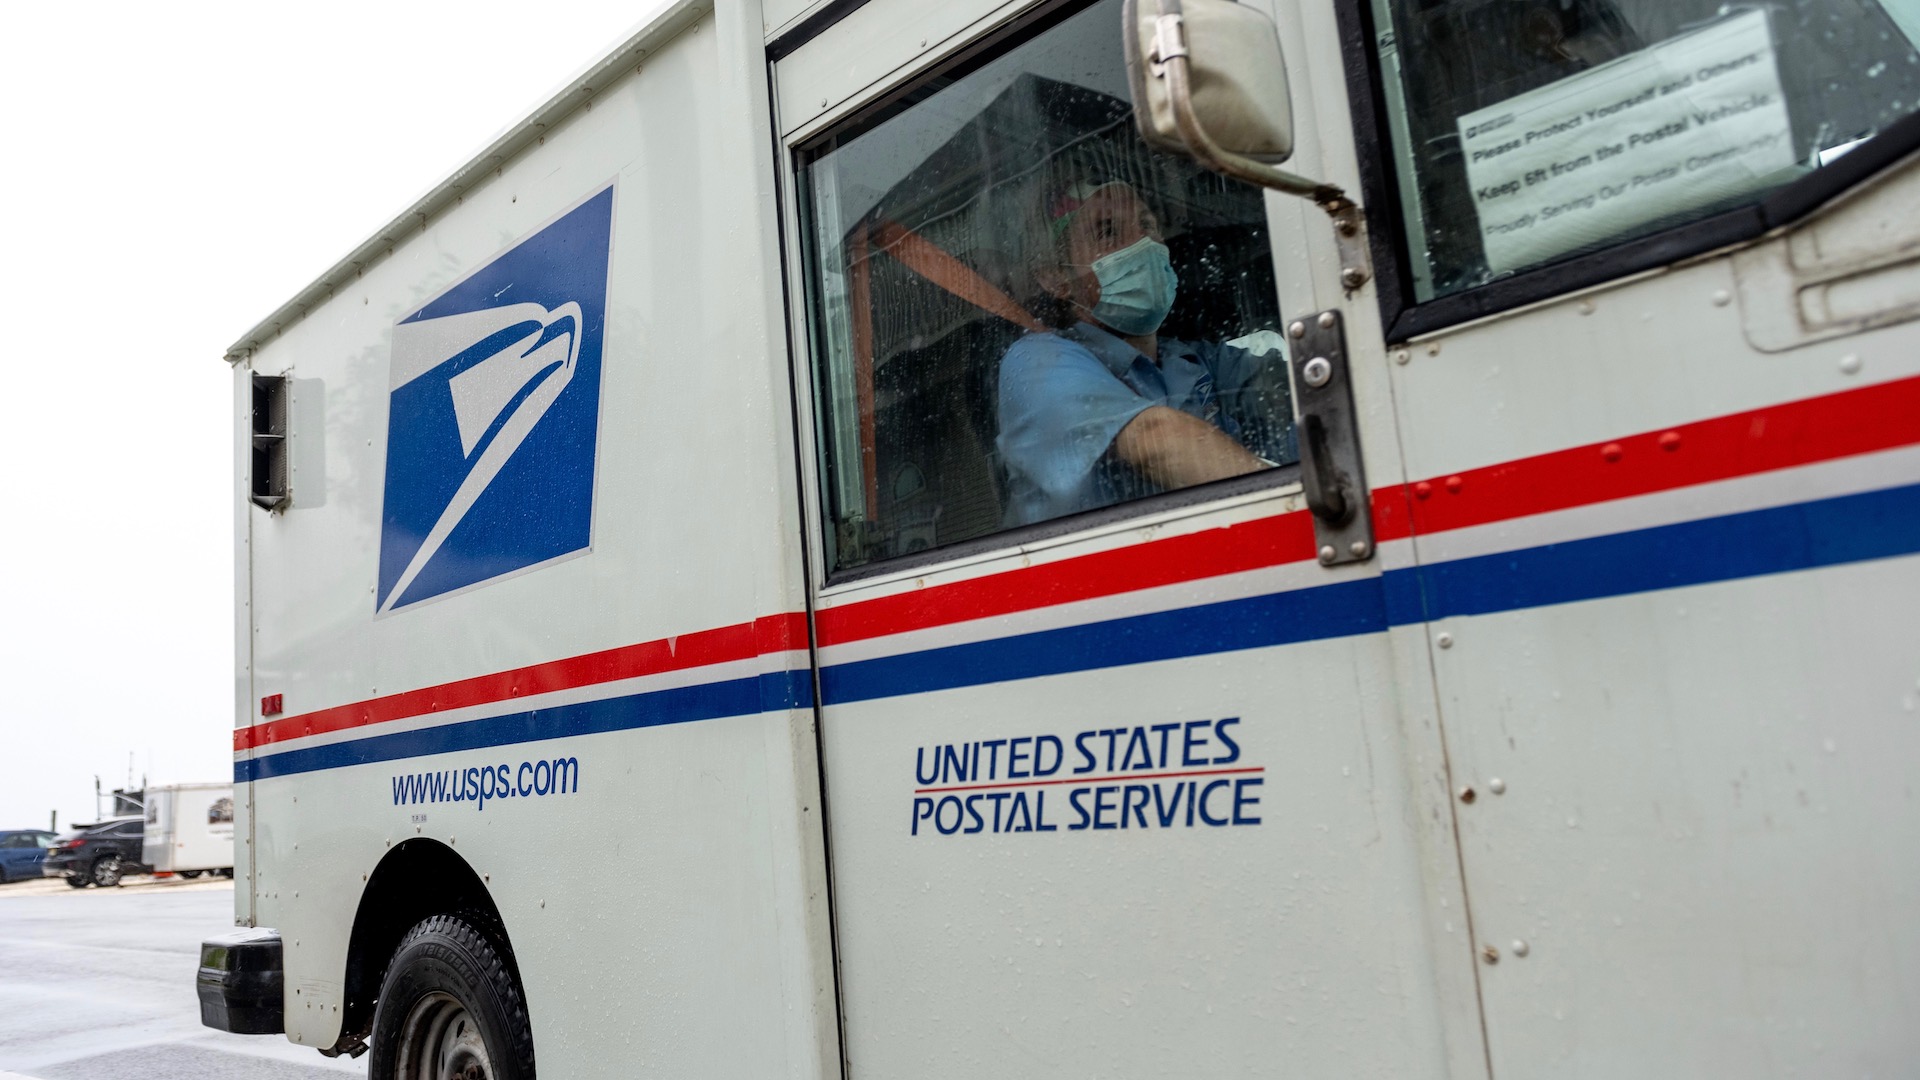 Social Media Responds to Trump's USPS Attack With Memes